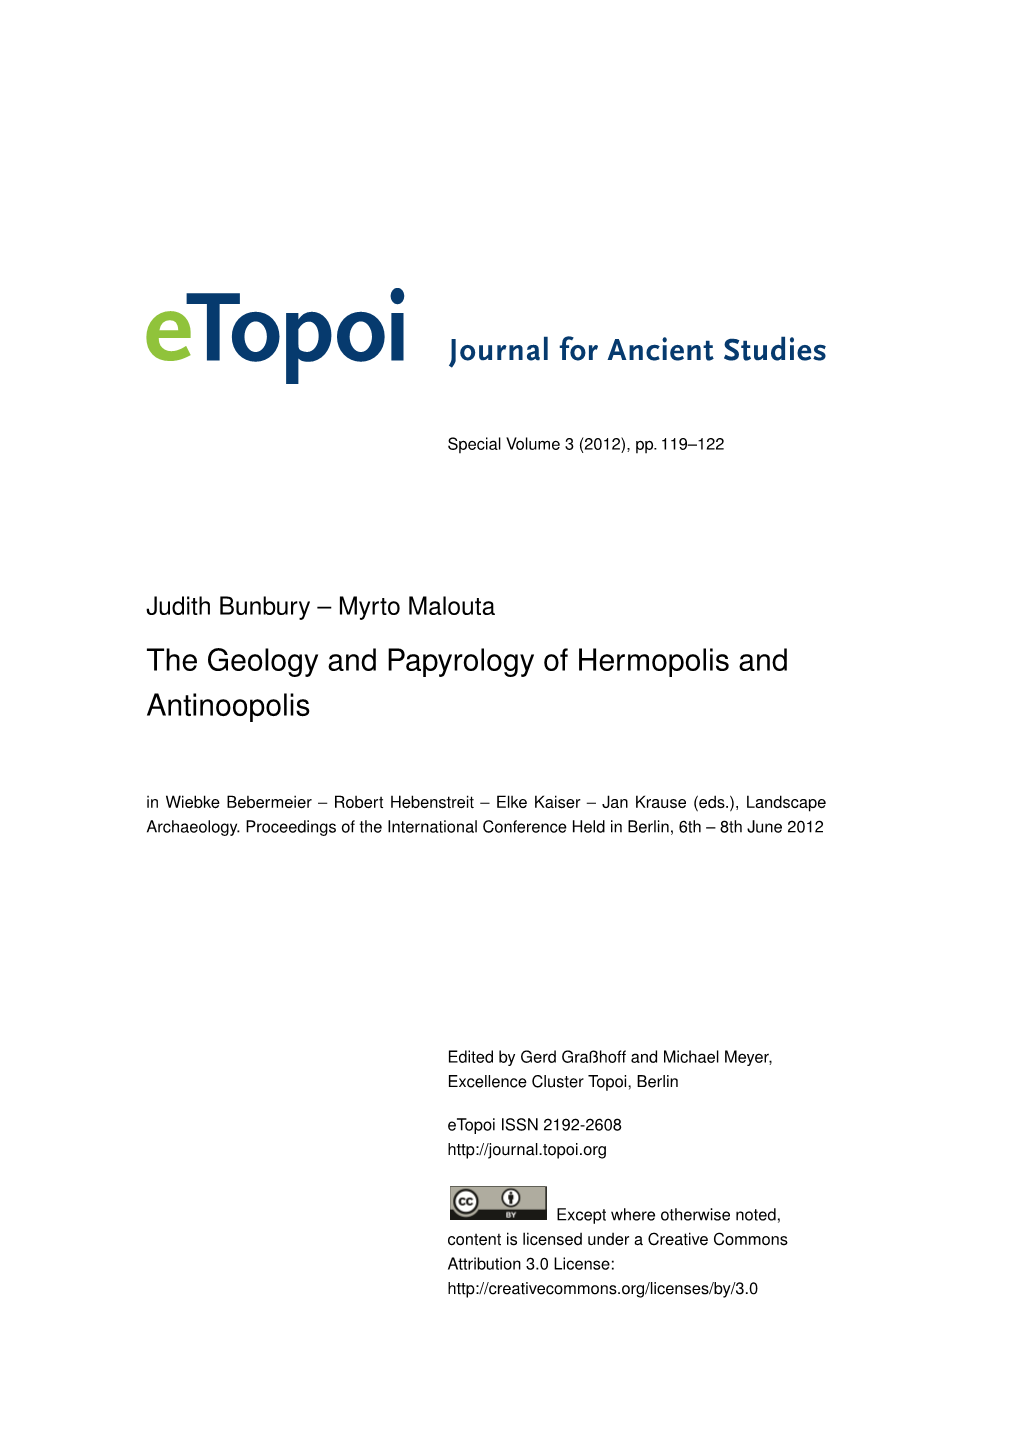 The Geology and Papyrology of Hermopolis and Antinoopolis